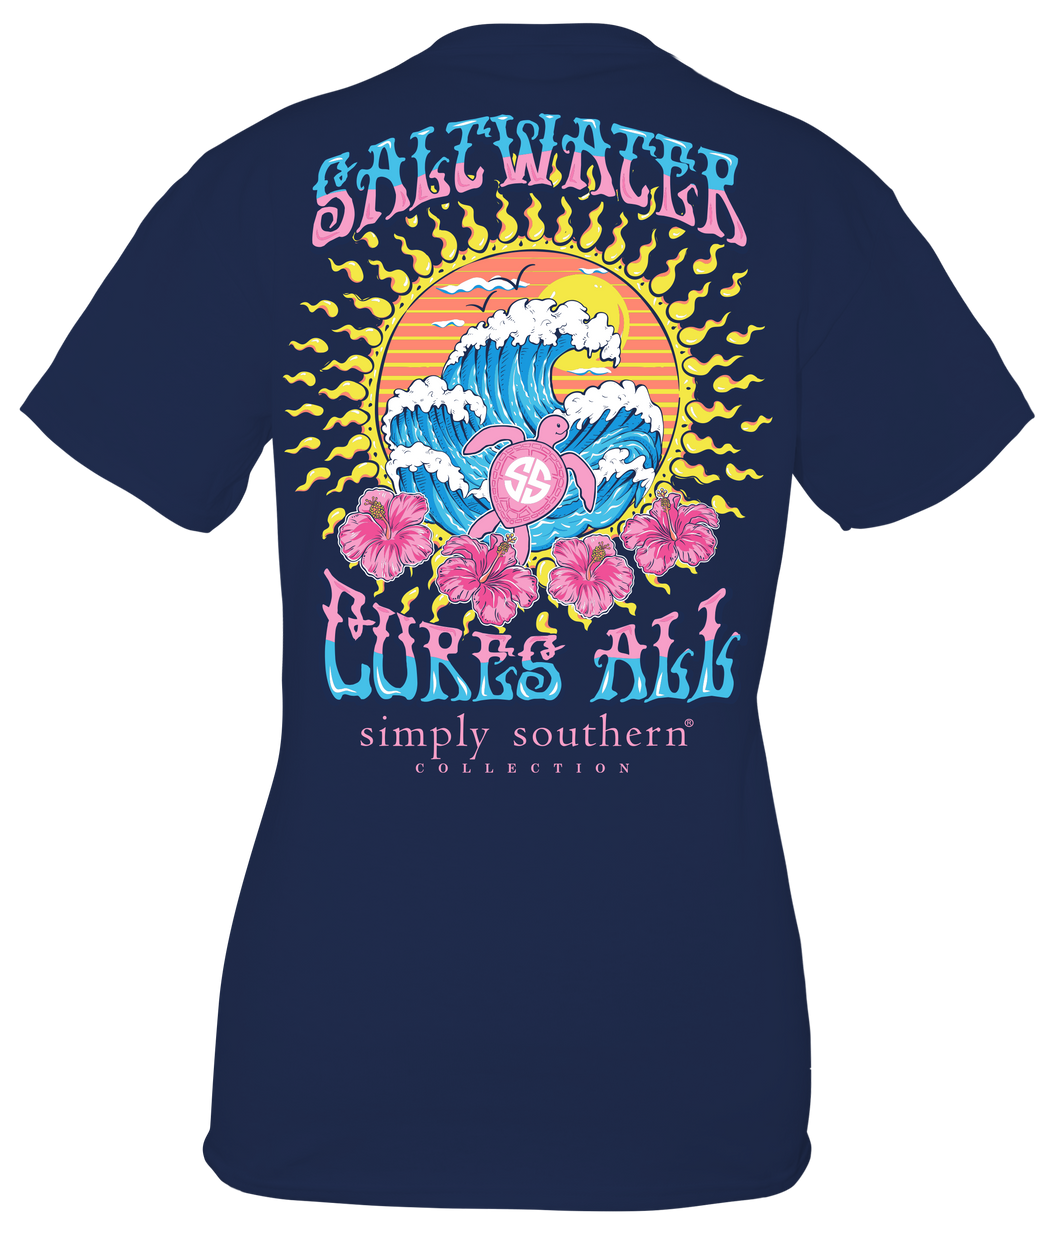 Simply Southern SALTWATER CURES ALL Short Sleeve T-Shirt